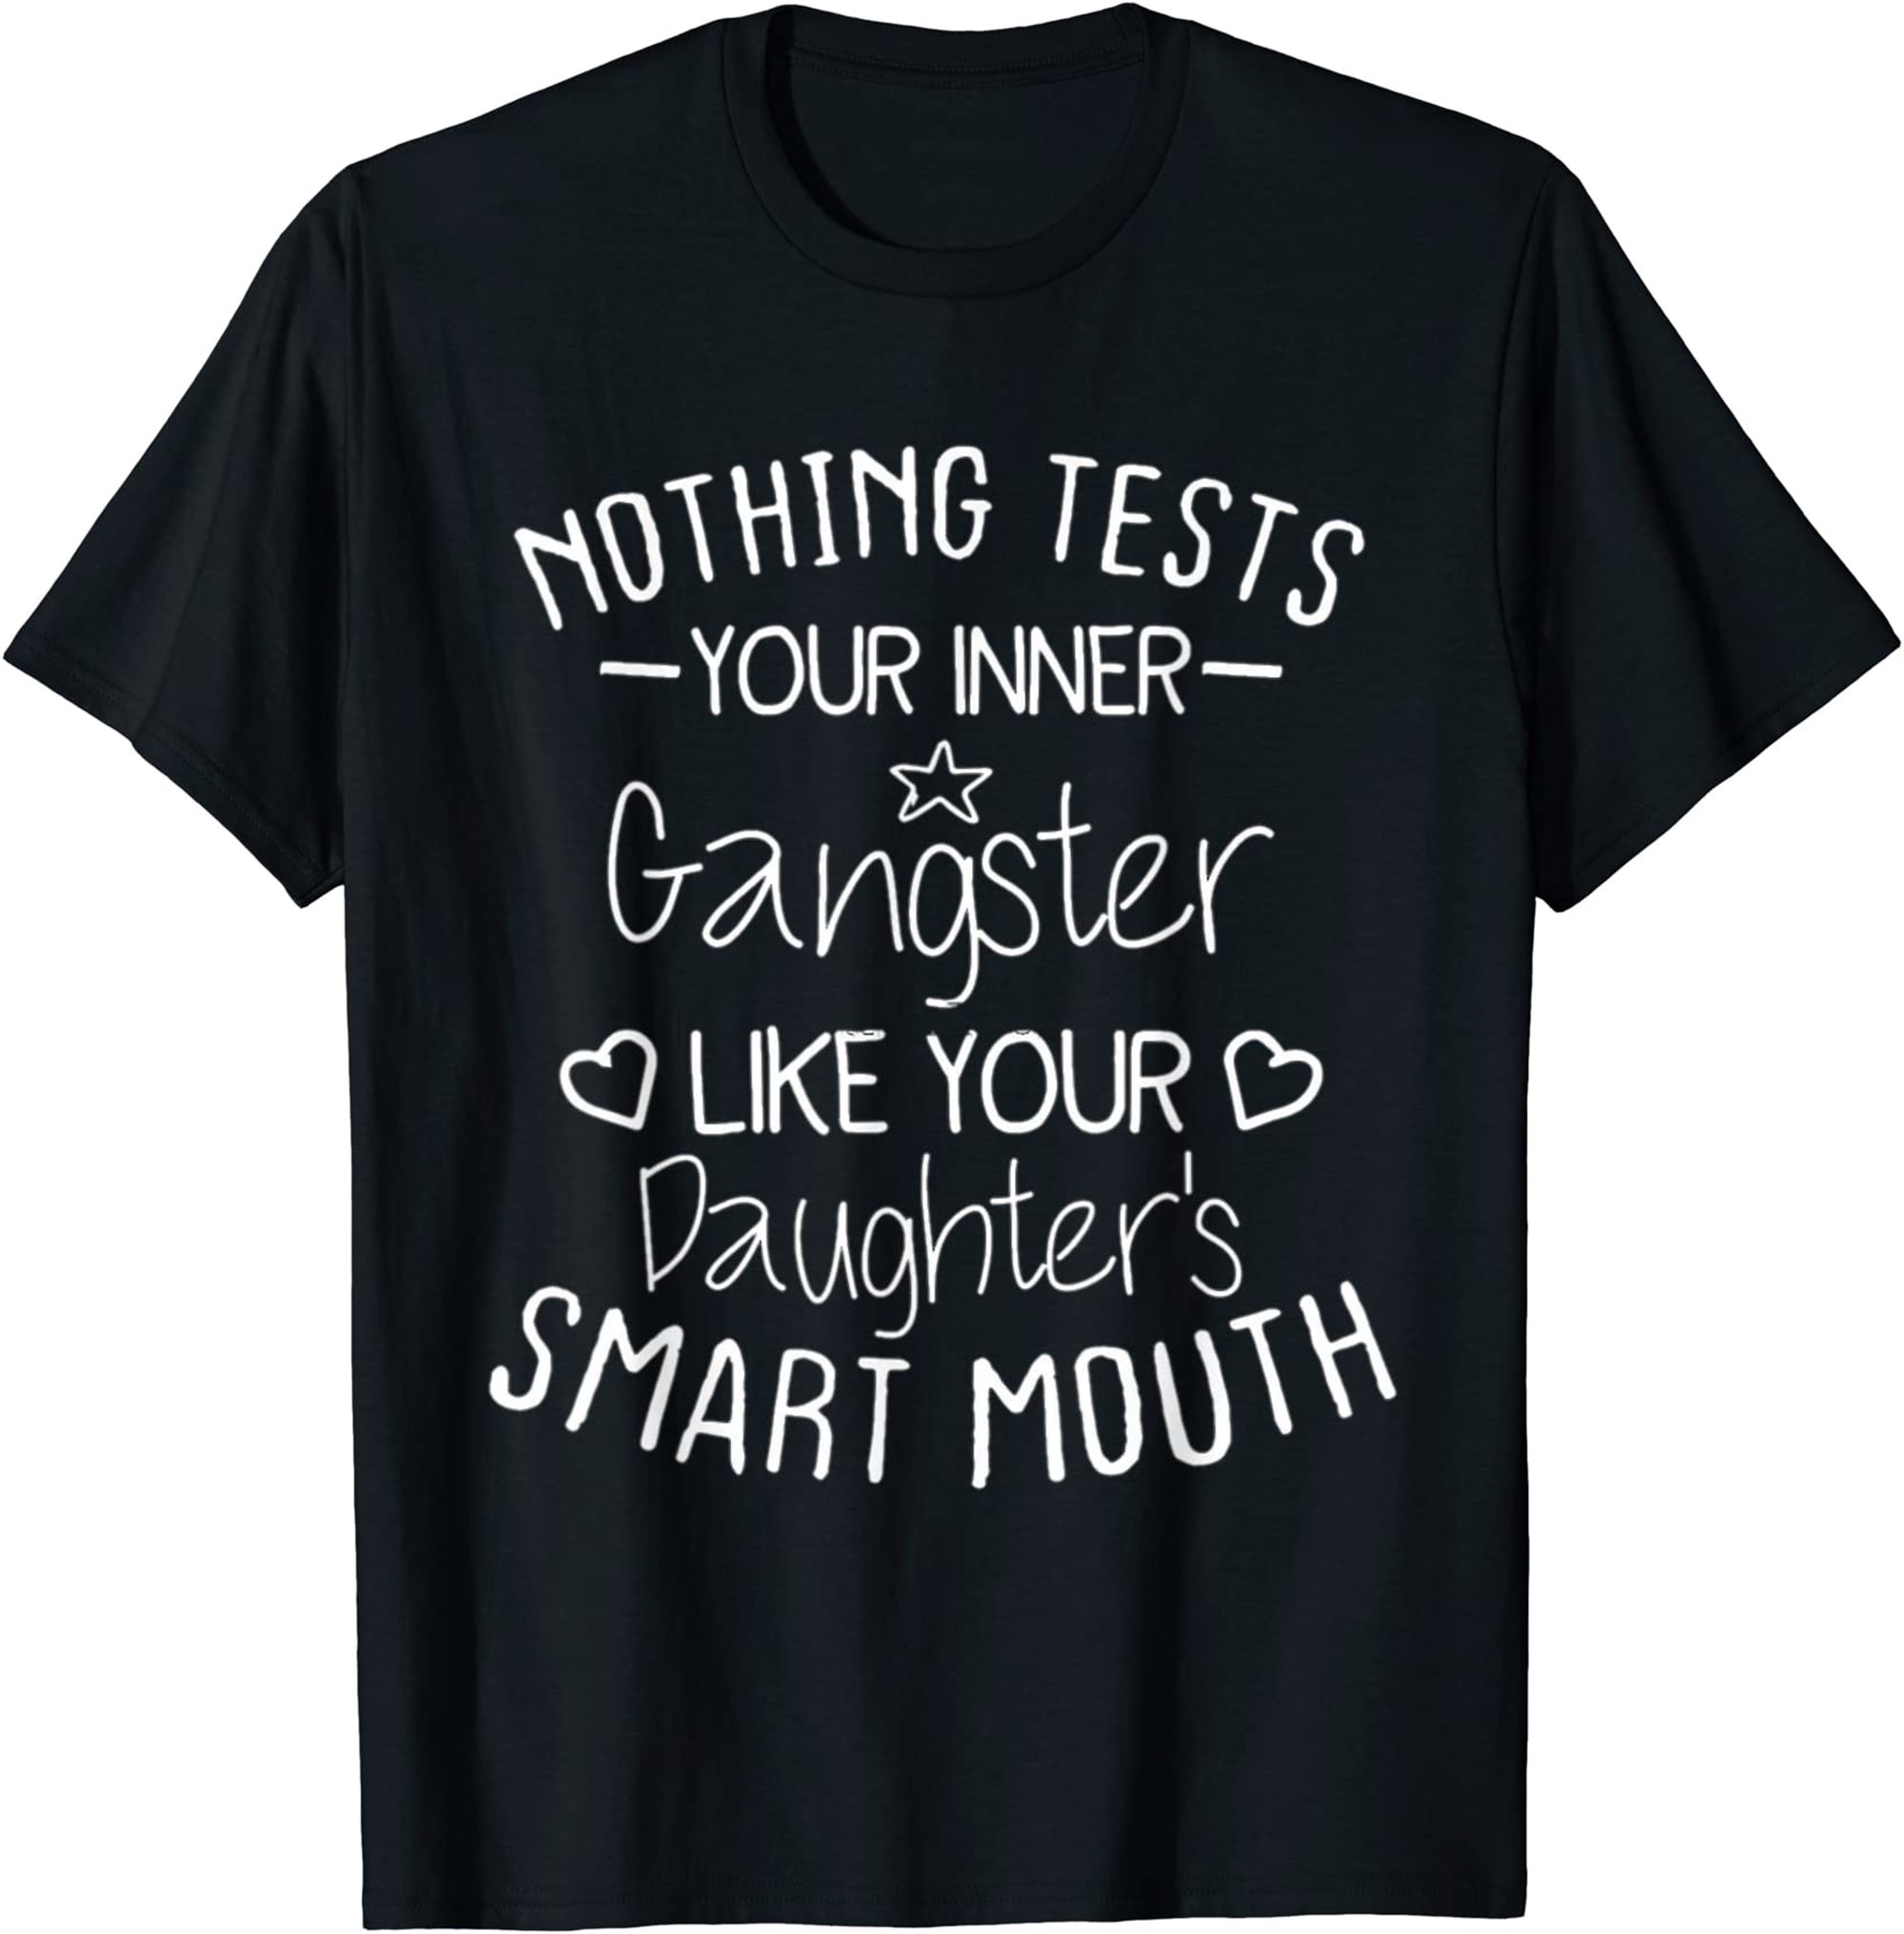 Tests Your Inner Gangster Like Your Daughters Mouth T-shirt Plus Size Up To 5xl